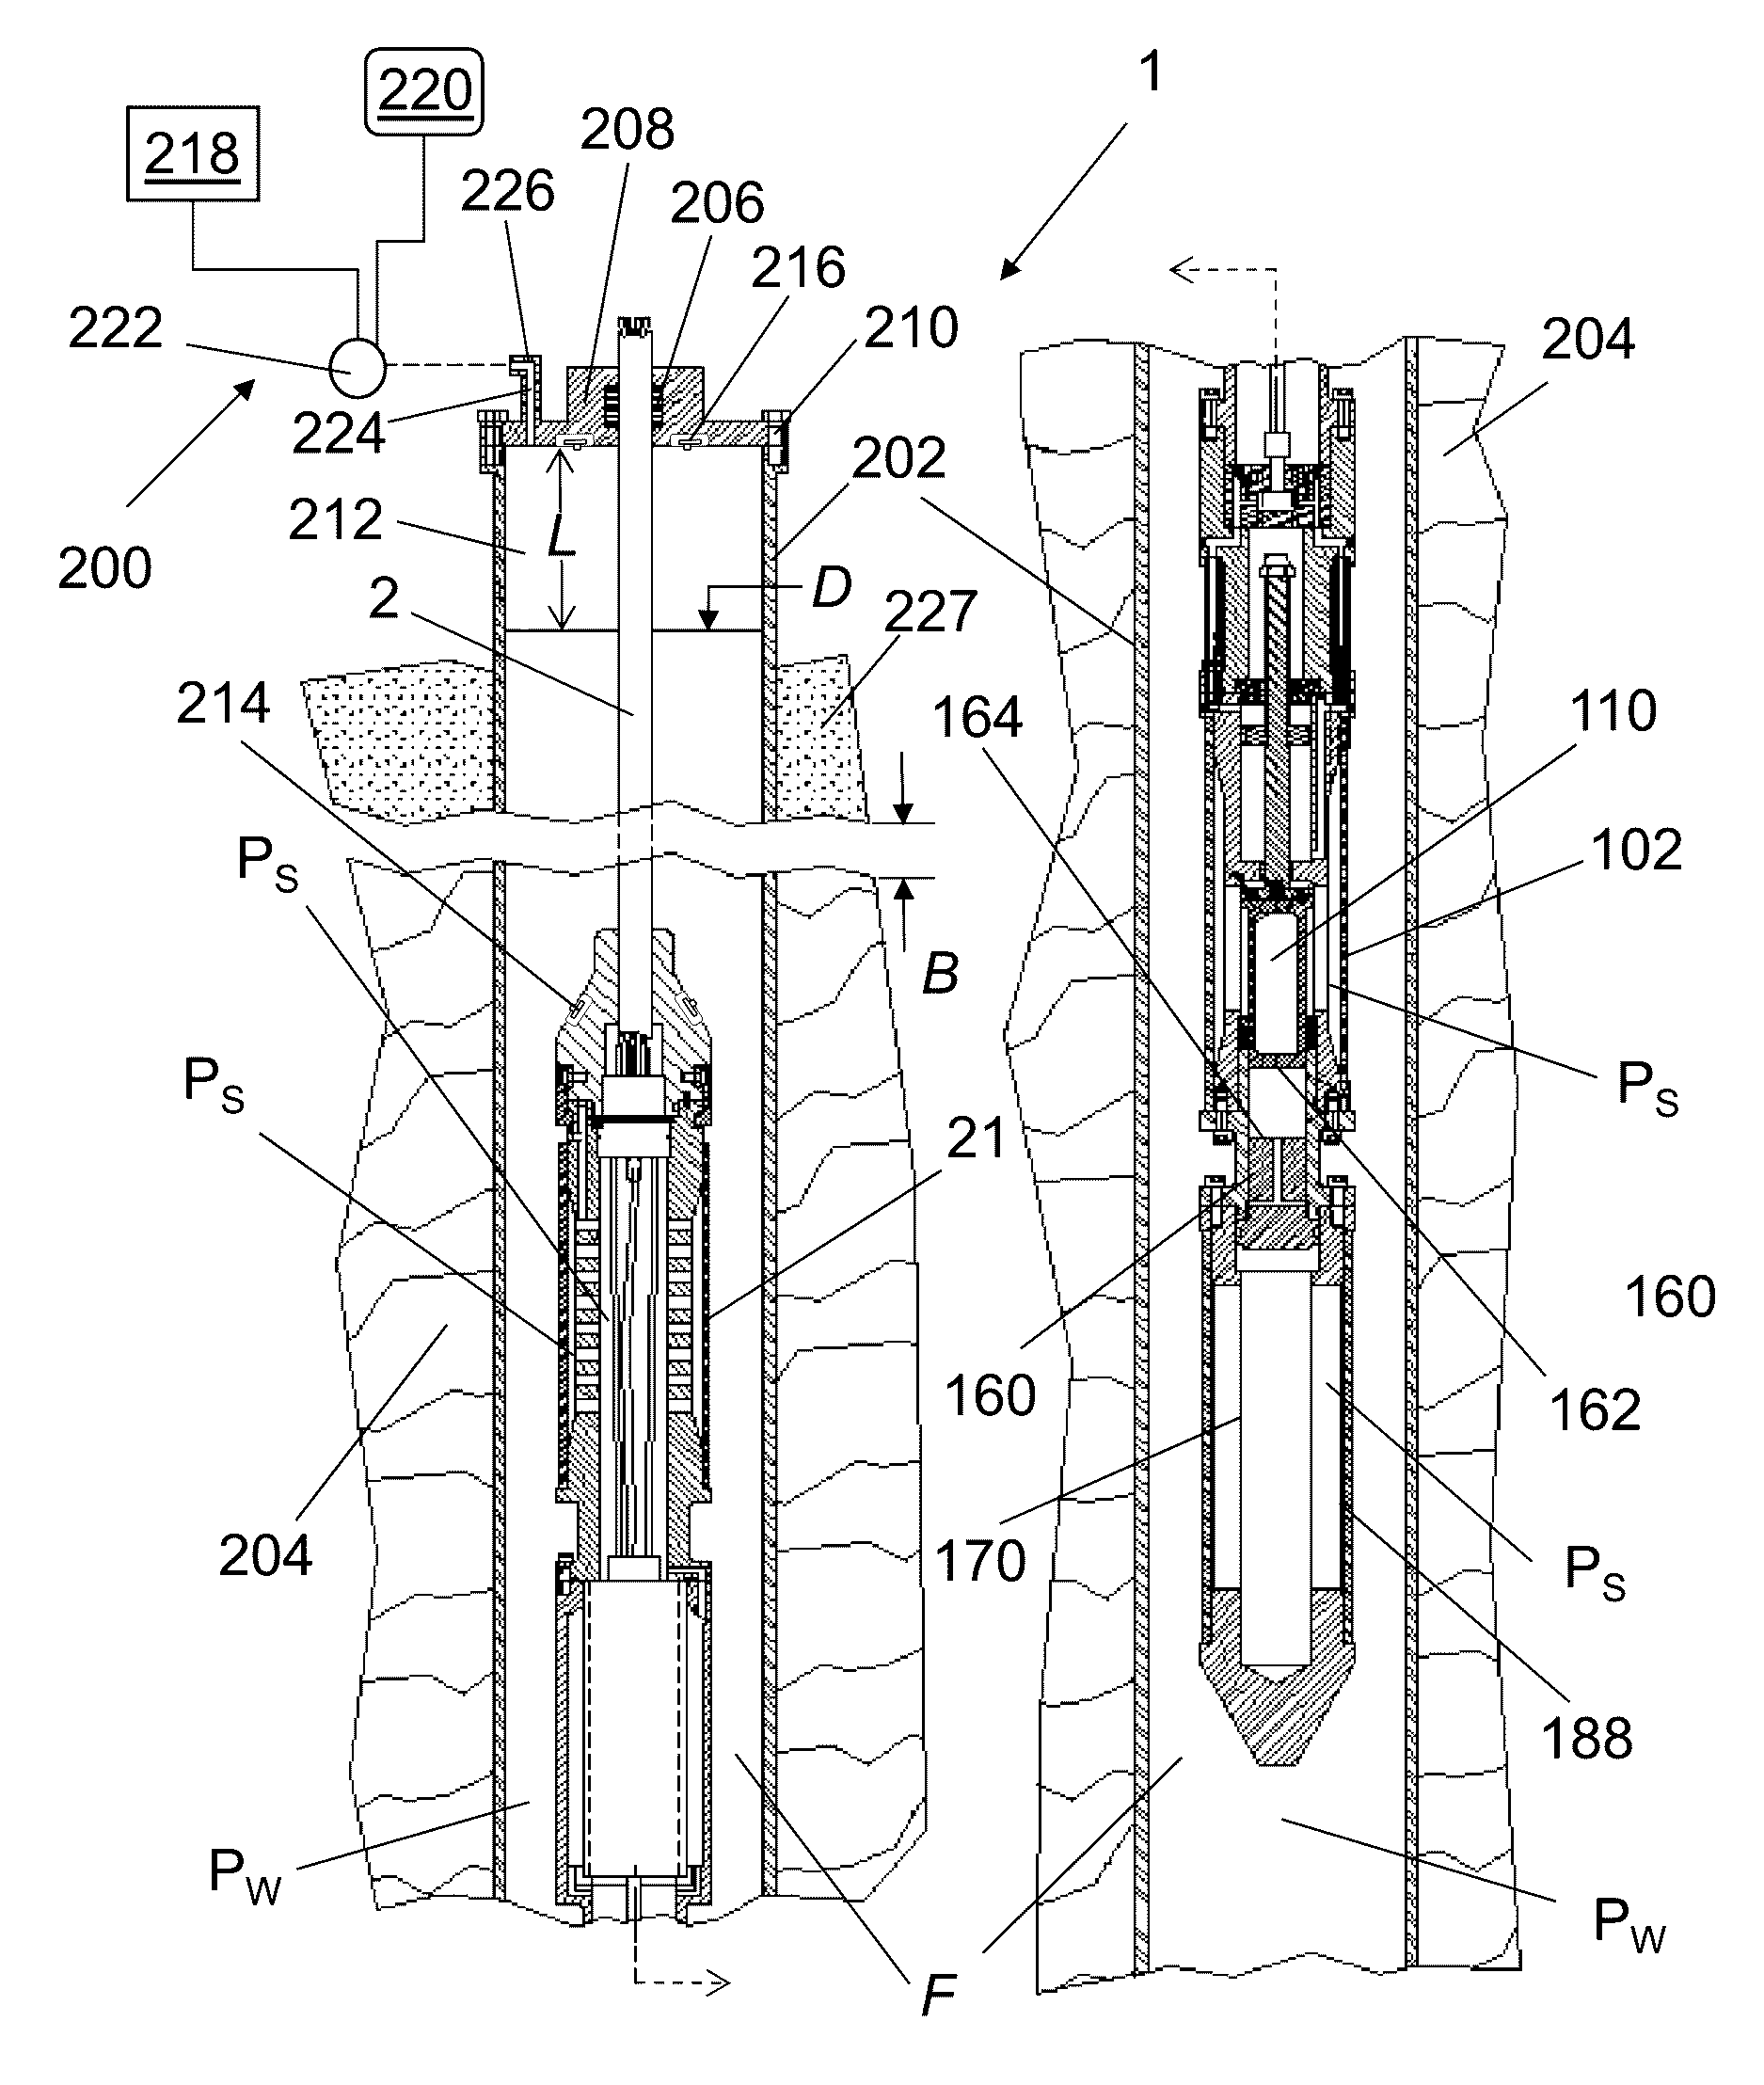 System and method for producing high quality seismic records within bore holes